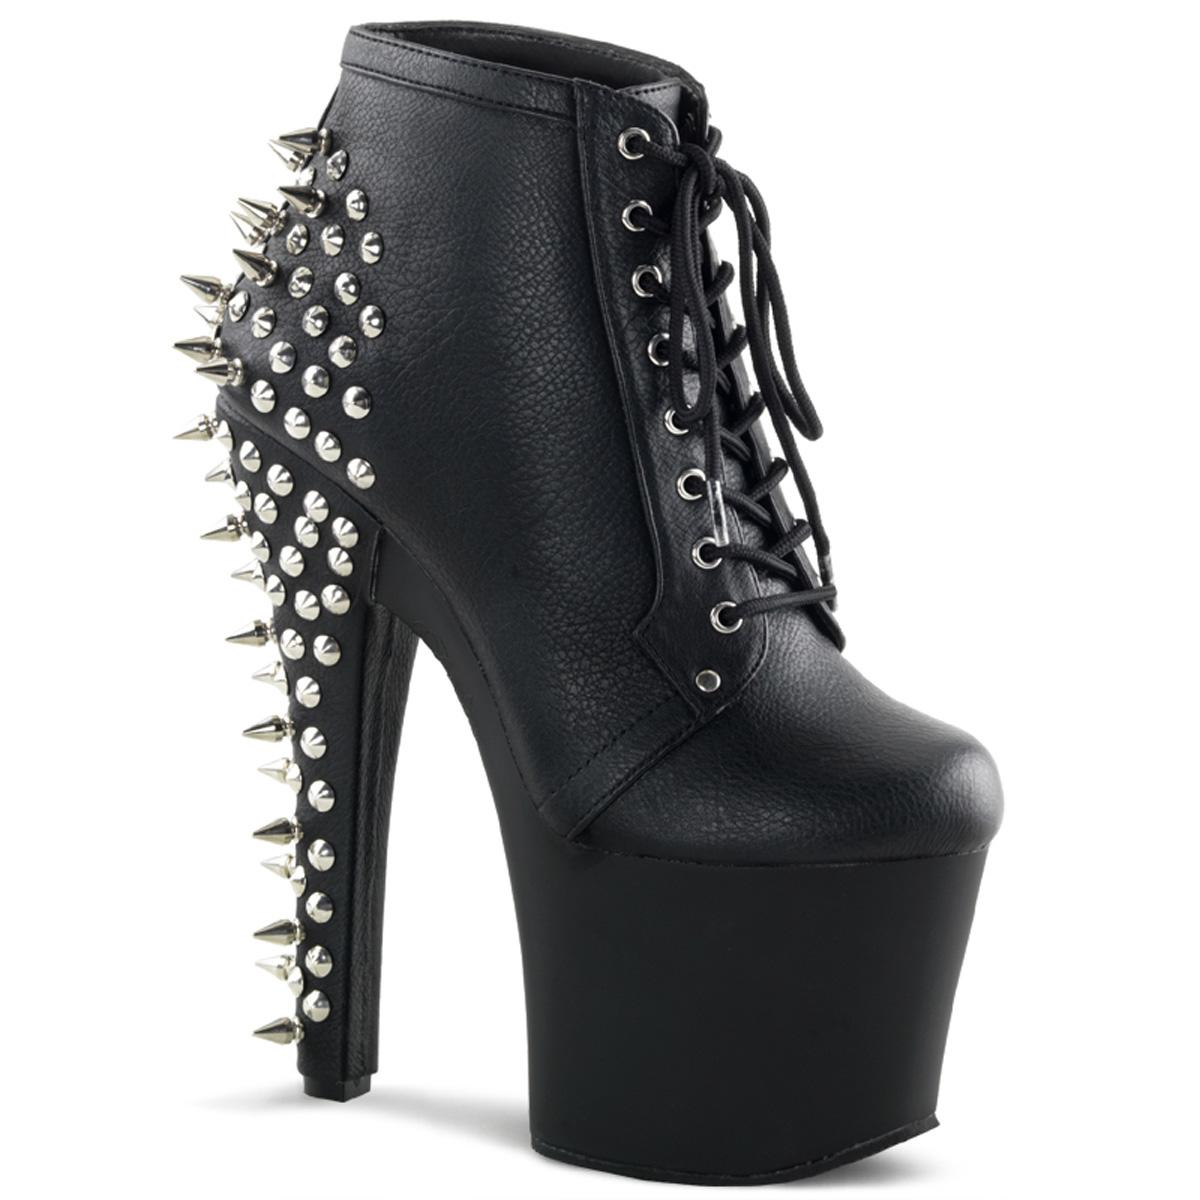 Black Lace Up Ankle Boot Studs & Spikes